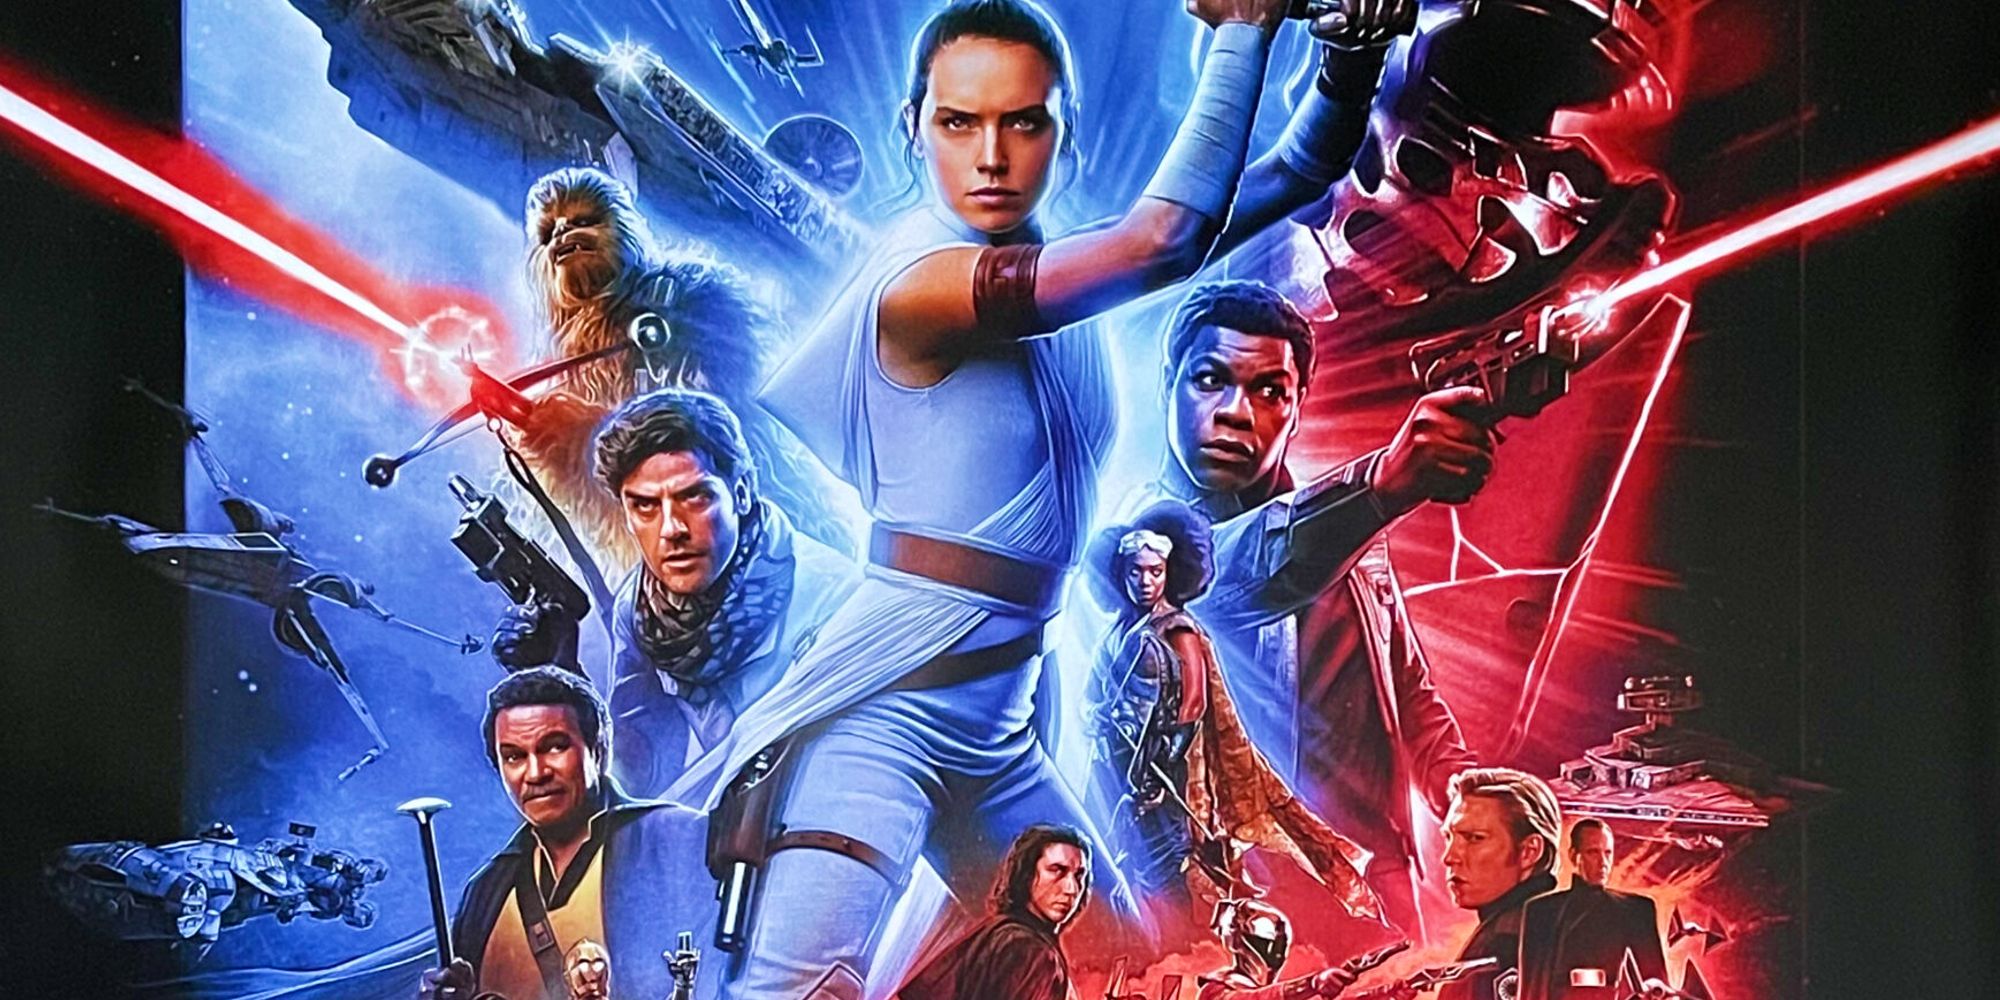 The RealD 3D and IMAX poster for Star Wars: The Rise of Skywalker